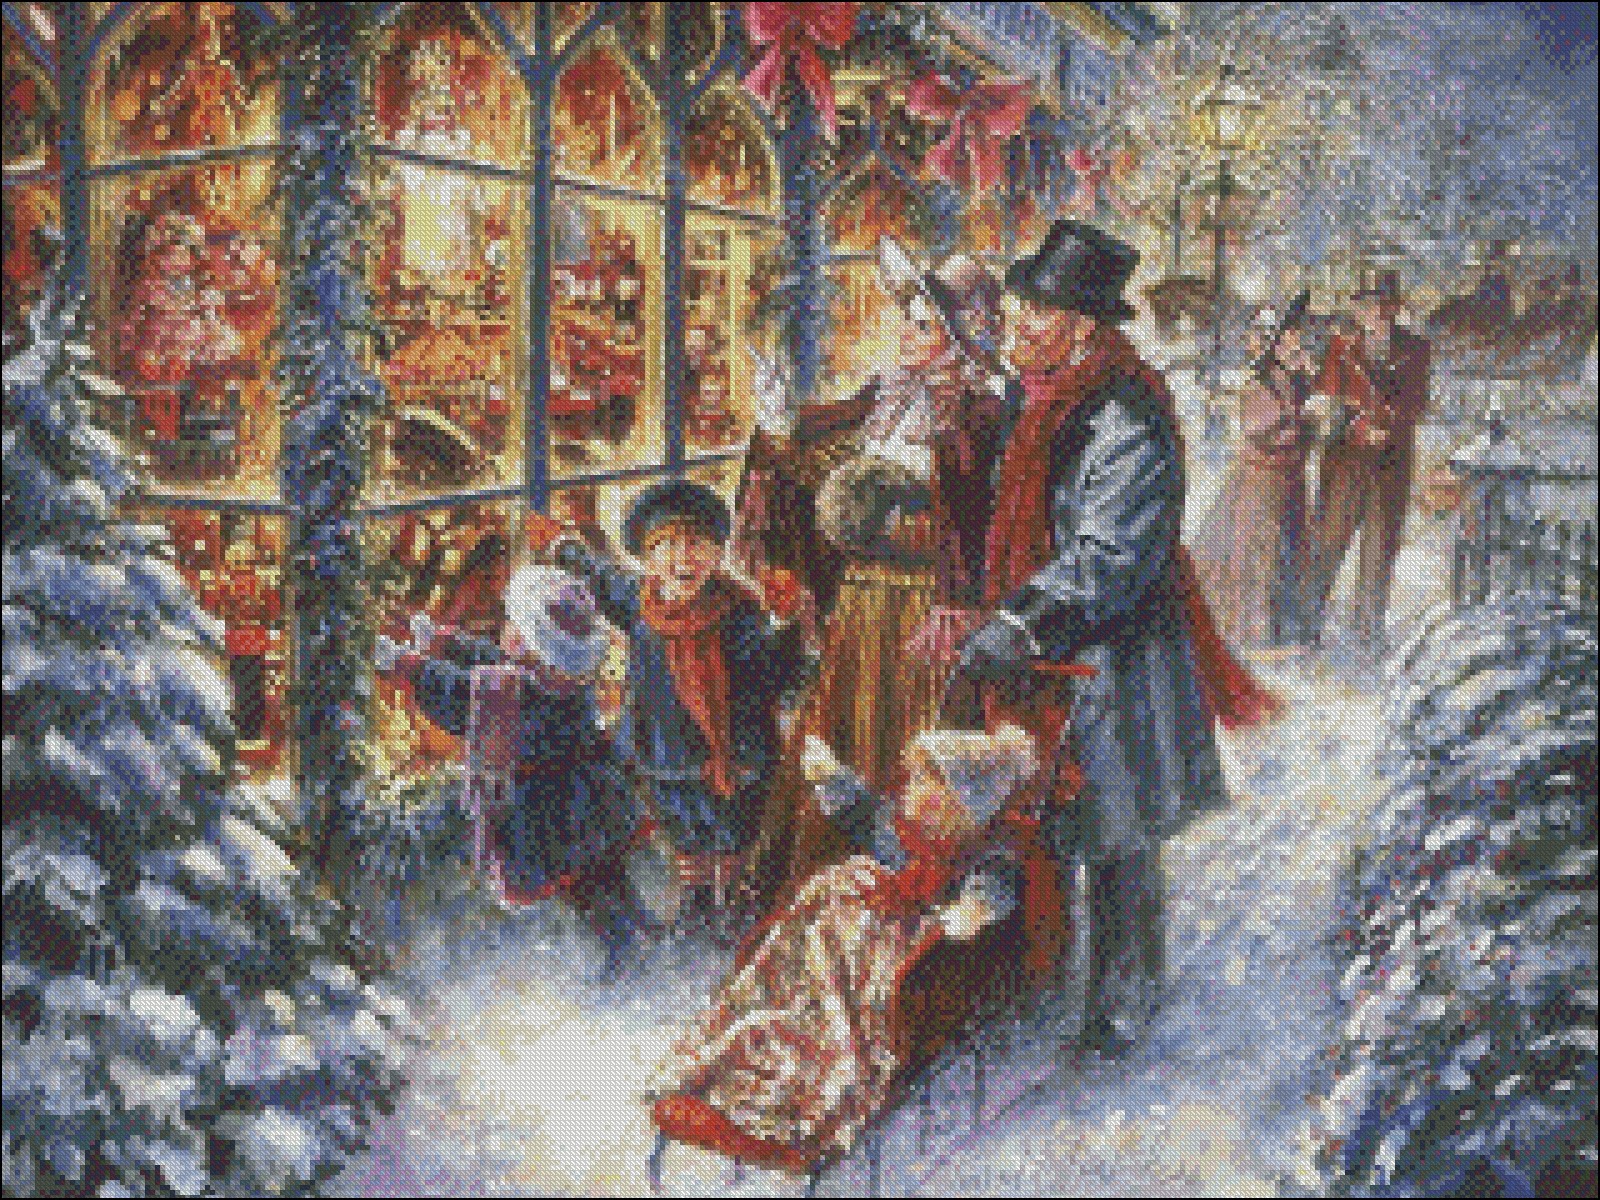 Victorian Christmas Wallpapers